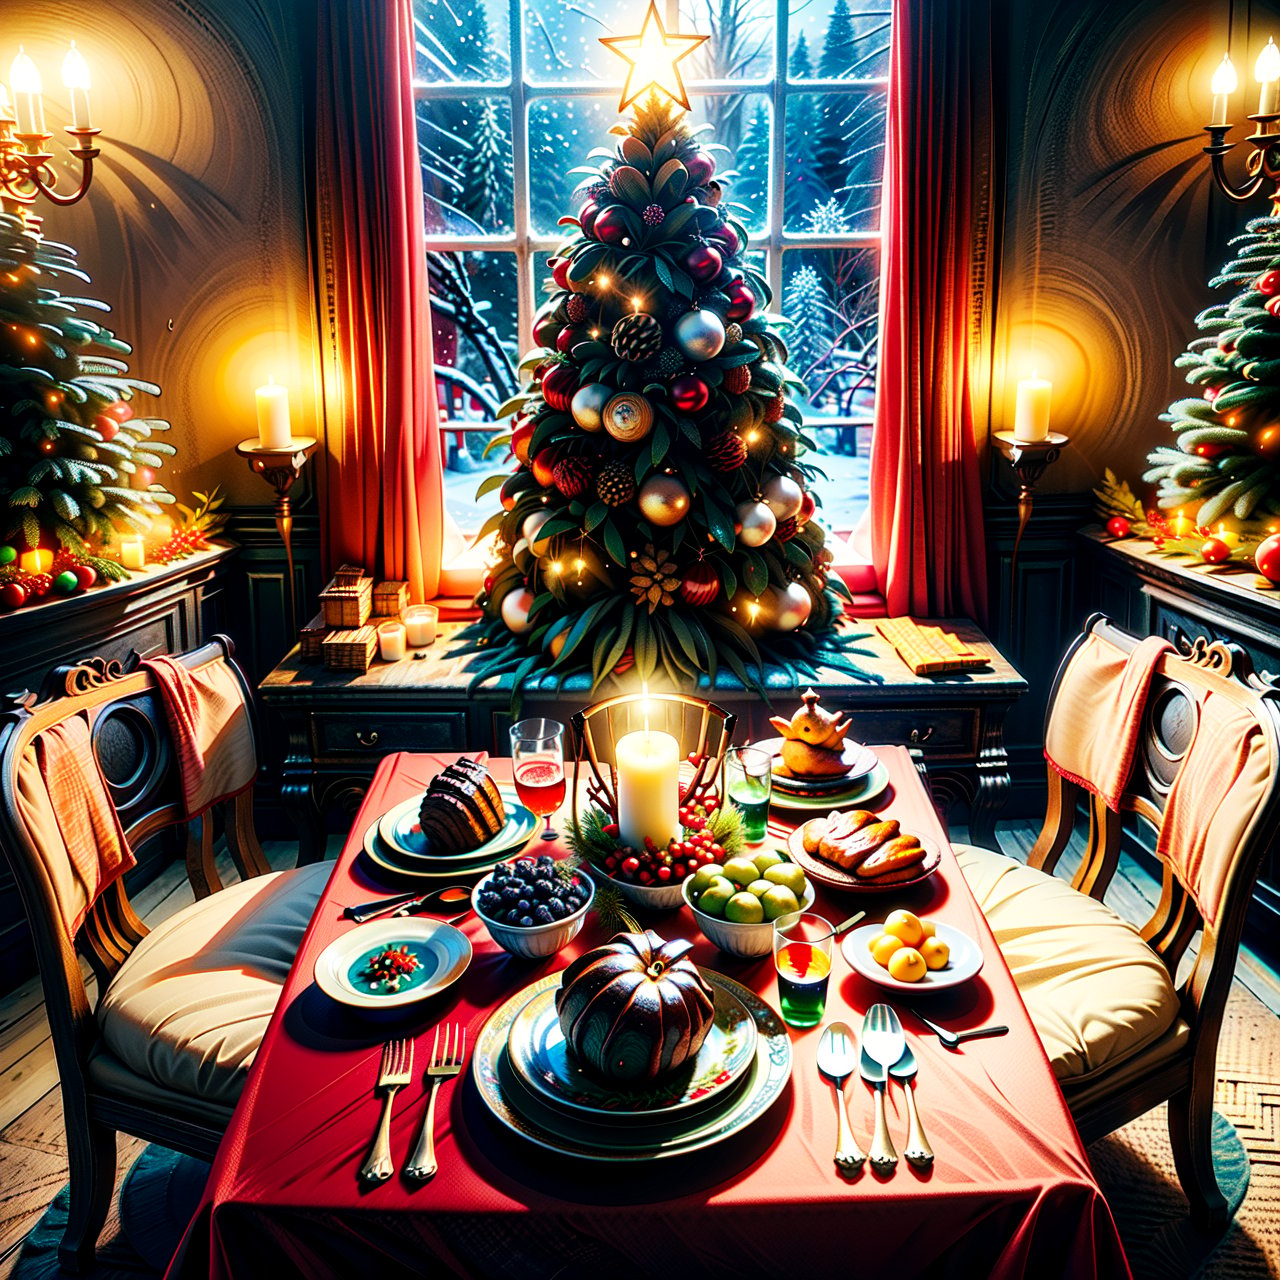 Christmas-themed room, The room is adorned with holiday decorations, creating a warm and inviting atmosphere. The dining table is the centerpiece, covered with a colorful tablecloth and laden with an array of Christmas foods, including a roast, various pies, and seasonal fruits. The highlight on the table is a large, artistically decorated Christmas tree-shaped cake. In the background, a beautifully decorated Christmas tree is illuminated with strings of lights, adding to the festive ambiance. Outside the window, the scene is enchanting with unique snowflake patterns gently falling, creating a picturesque winter wonderland. The overall scene encapsulates the joy and warmth of the Christmas season, 